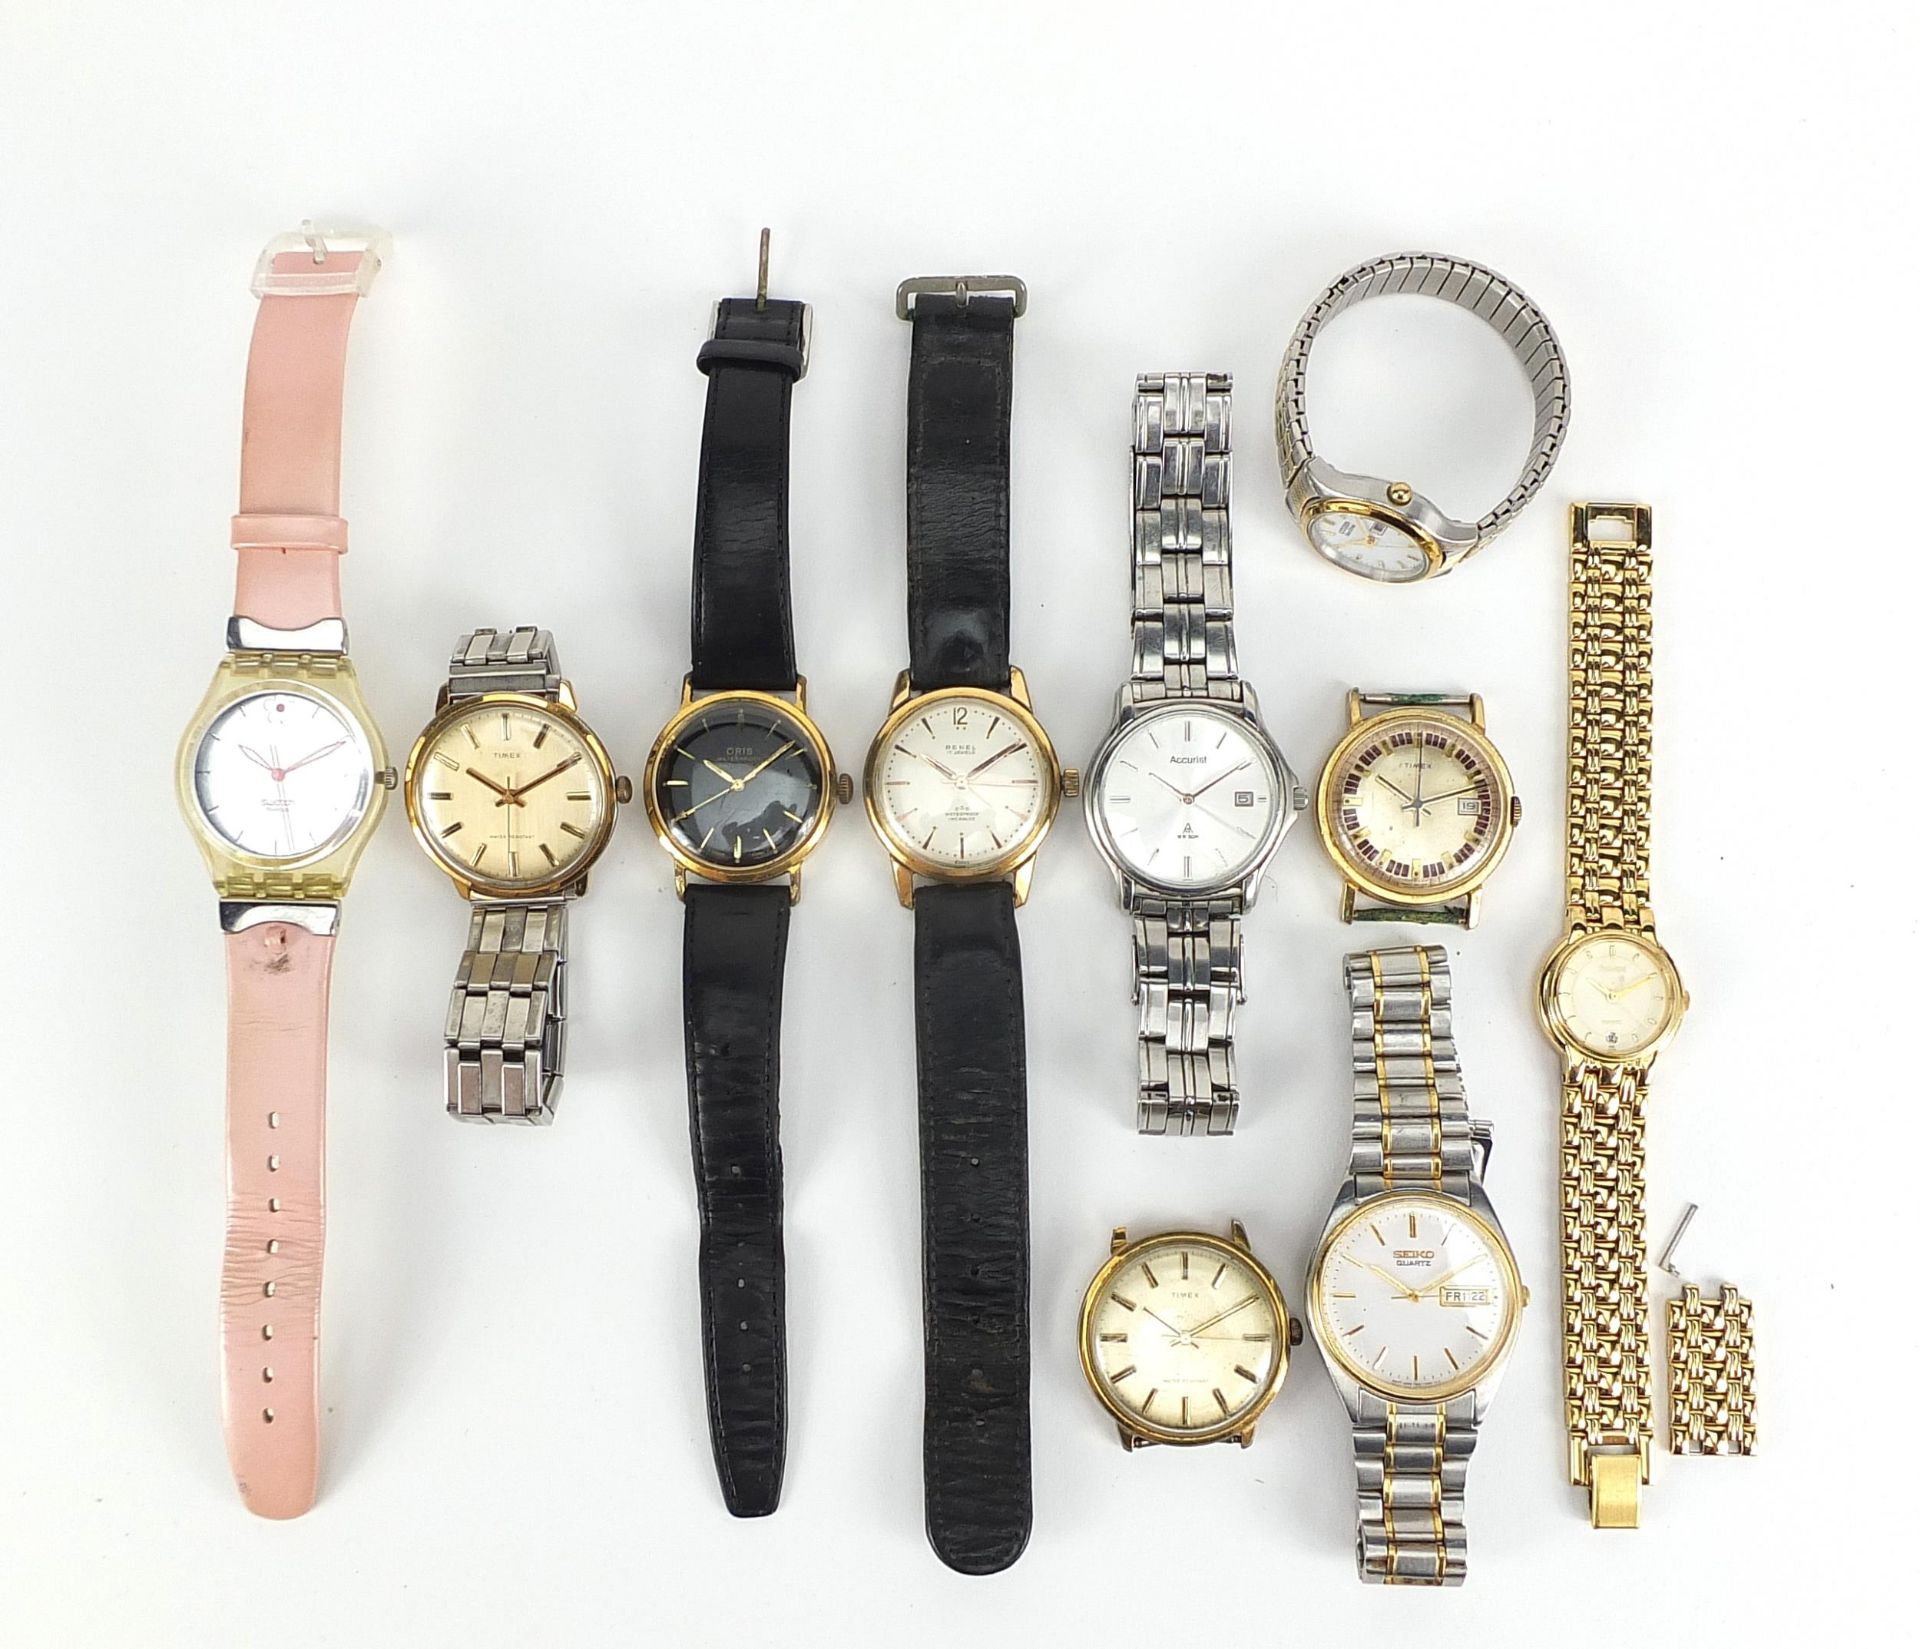 Vintage and later gentlemen's and ladies wristwatches including Renel, Timex, Seiko and Oris